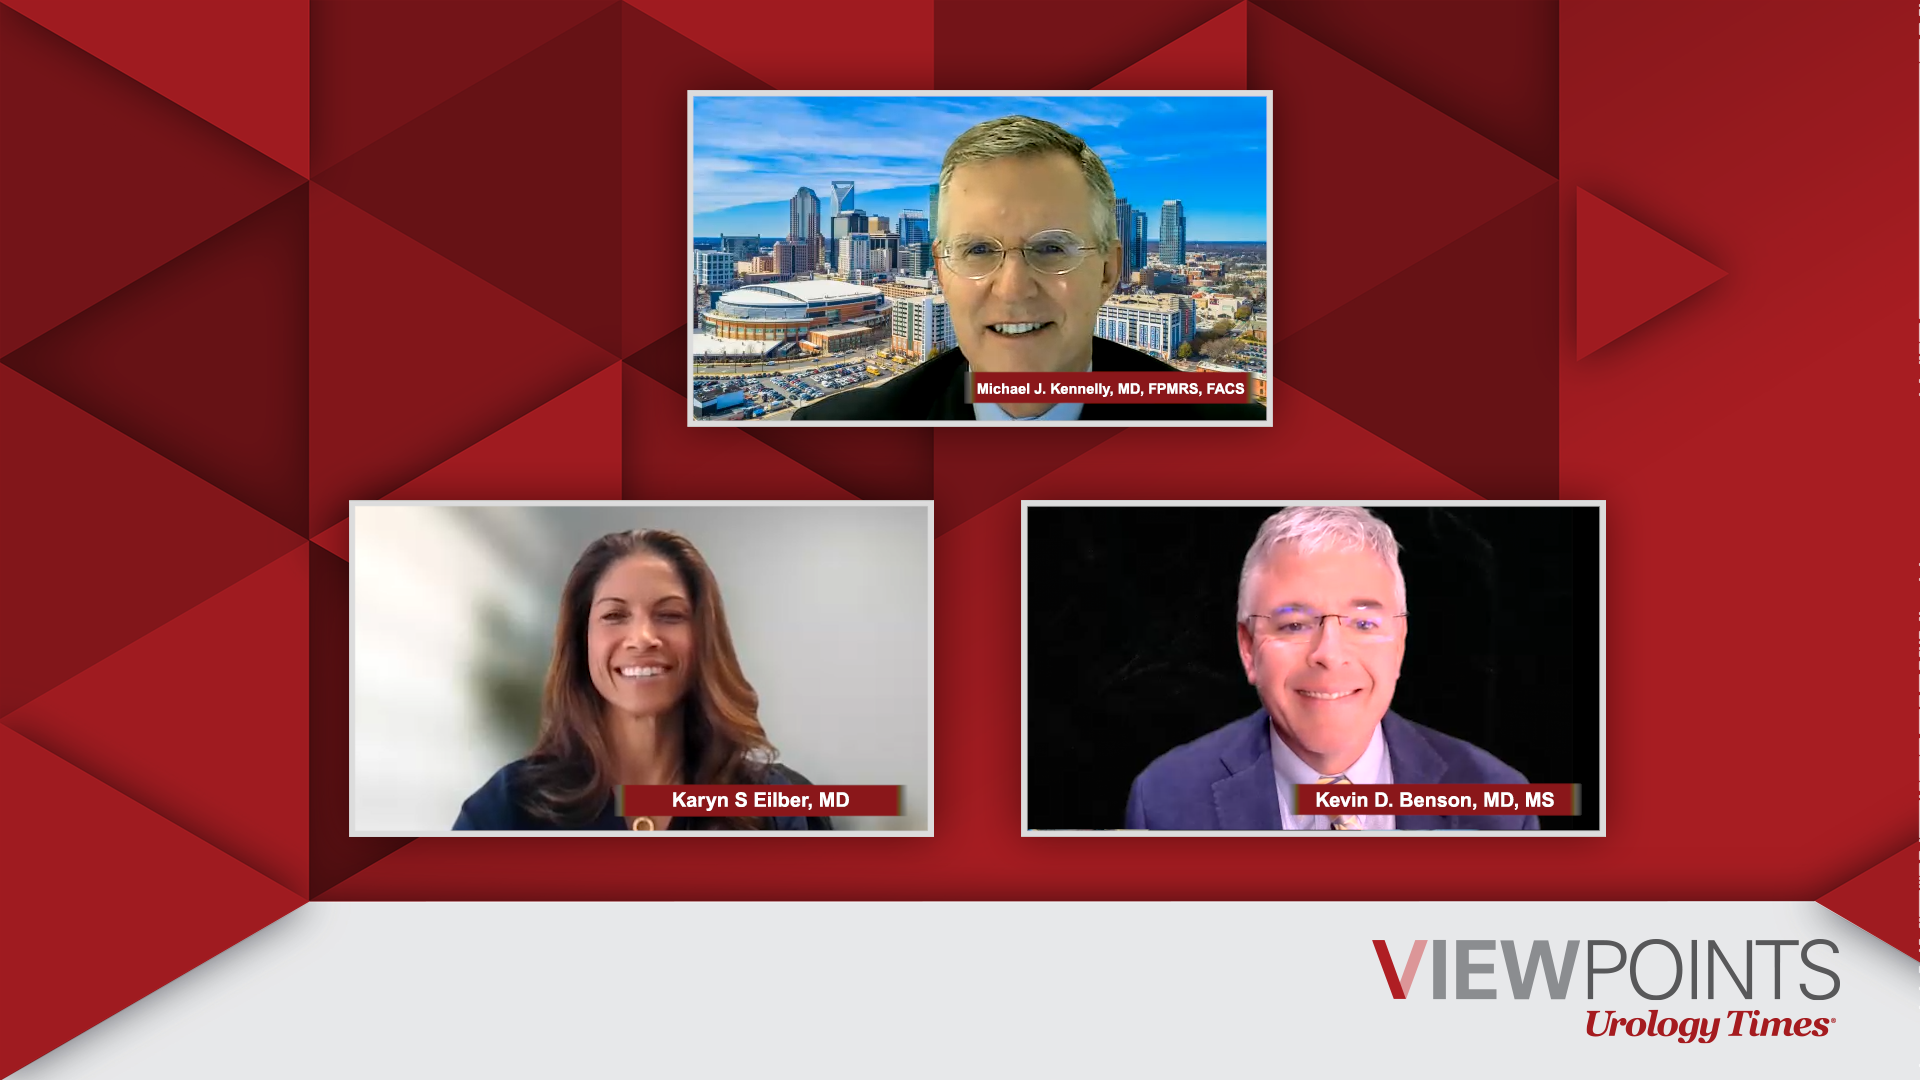 A panel of 3 experts on overactive bladder